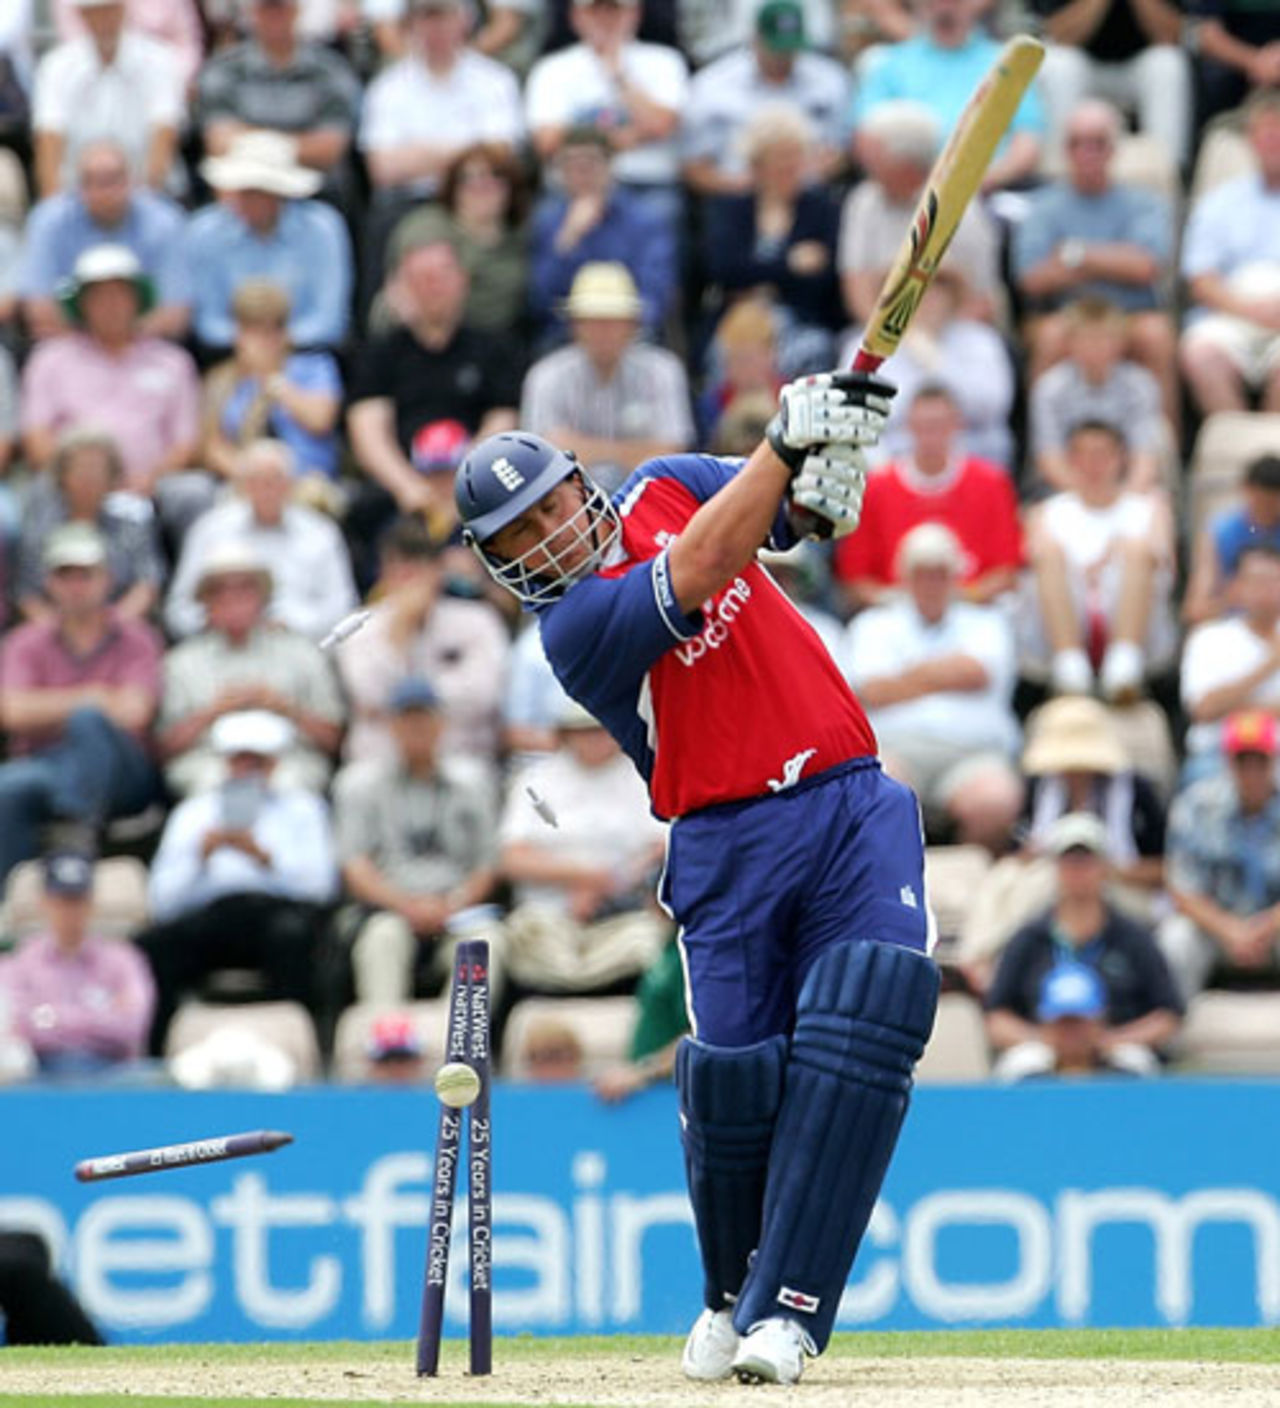 Darren Gough swings and misses, as England struggle against Hampshire, June 11, 2005